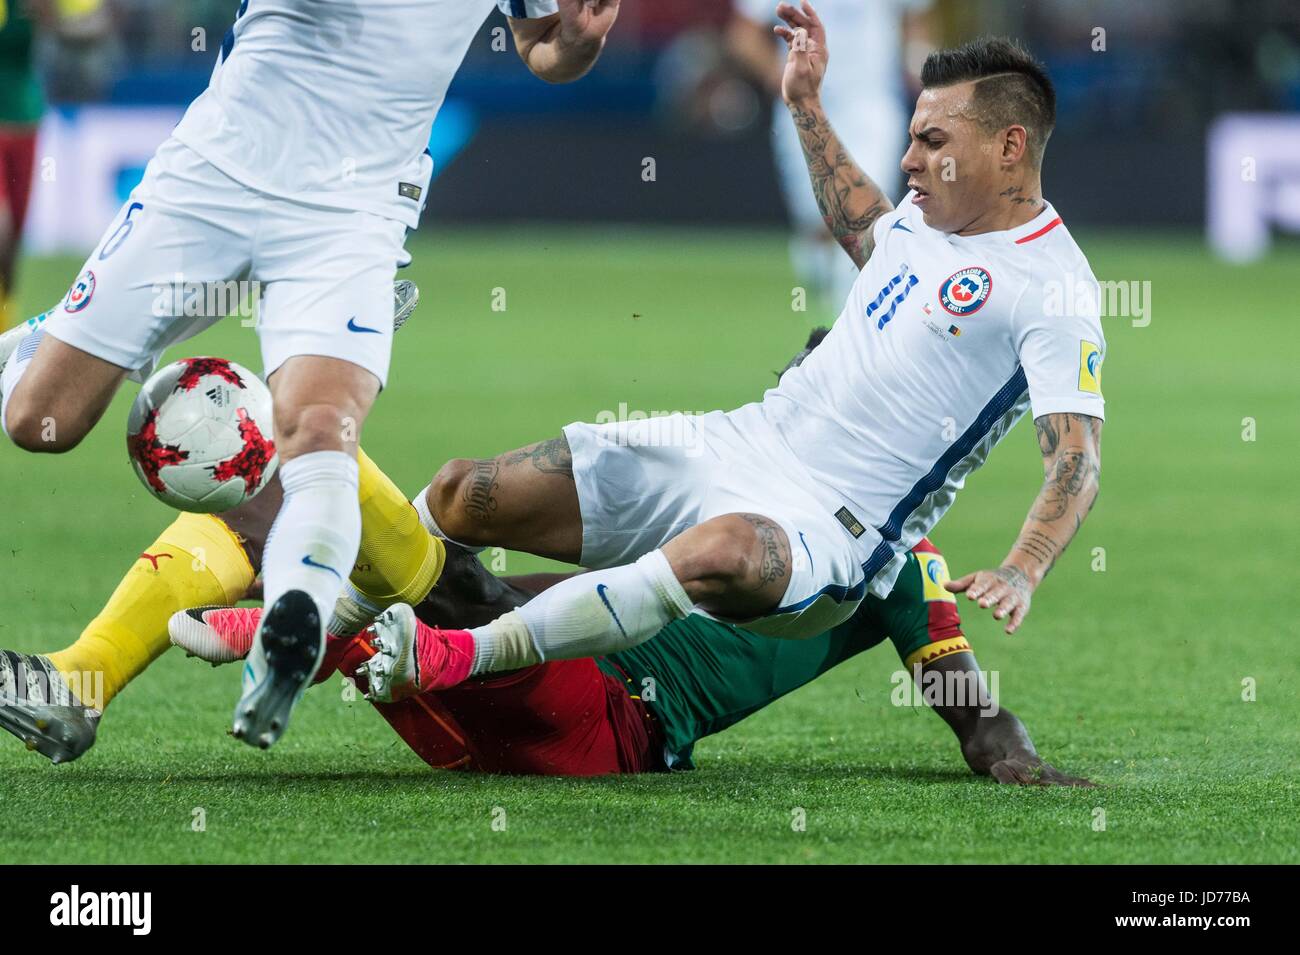 Moscow, Russia. 18th June, 2017. Chile's Eduardo Vargas (R) vies for the ball during the 2017 Confederations Cup football Group B match between Cameroon and Chile in Moscow, Russia, June 18, 2017. Credit: Evgeny Sinitsyn/Xinhua/Alamy Live News Stock Photo